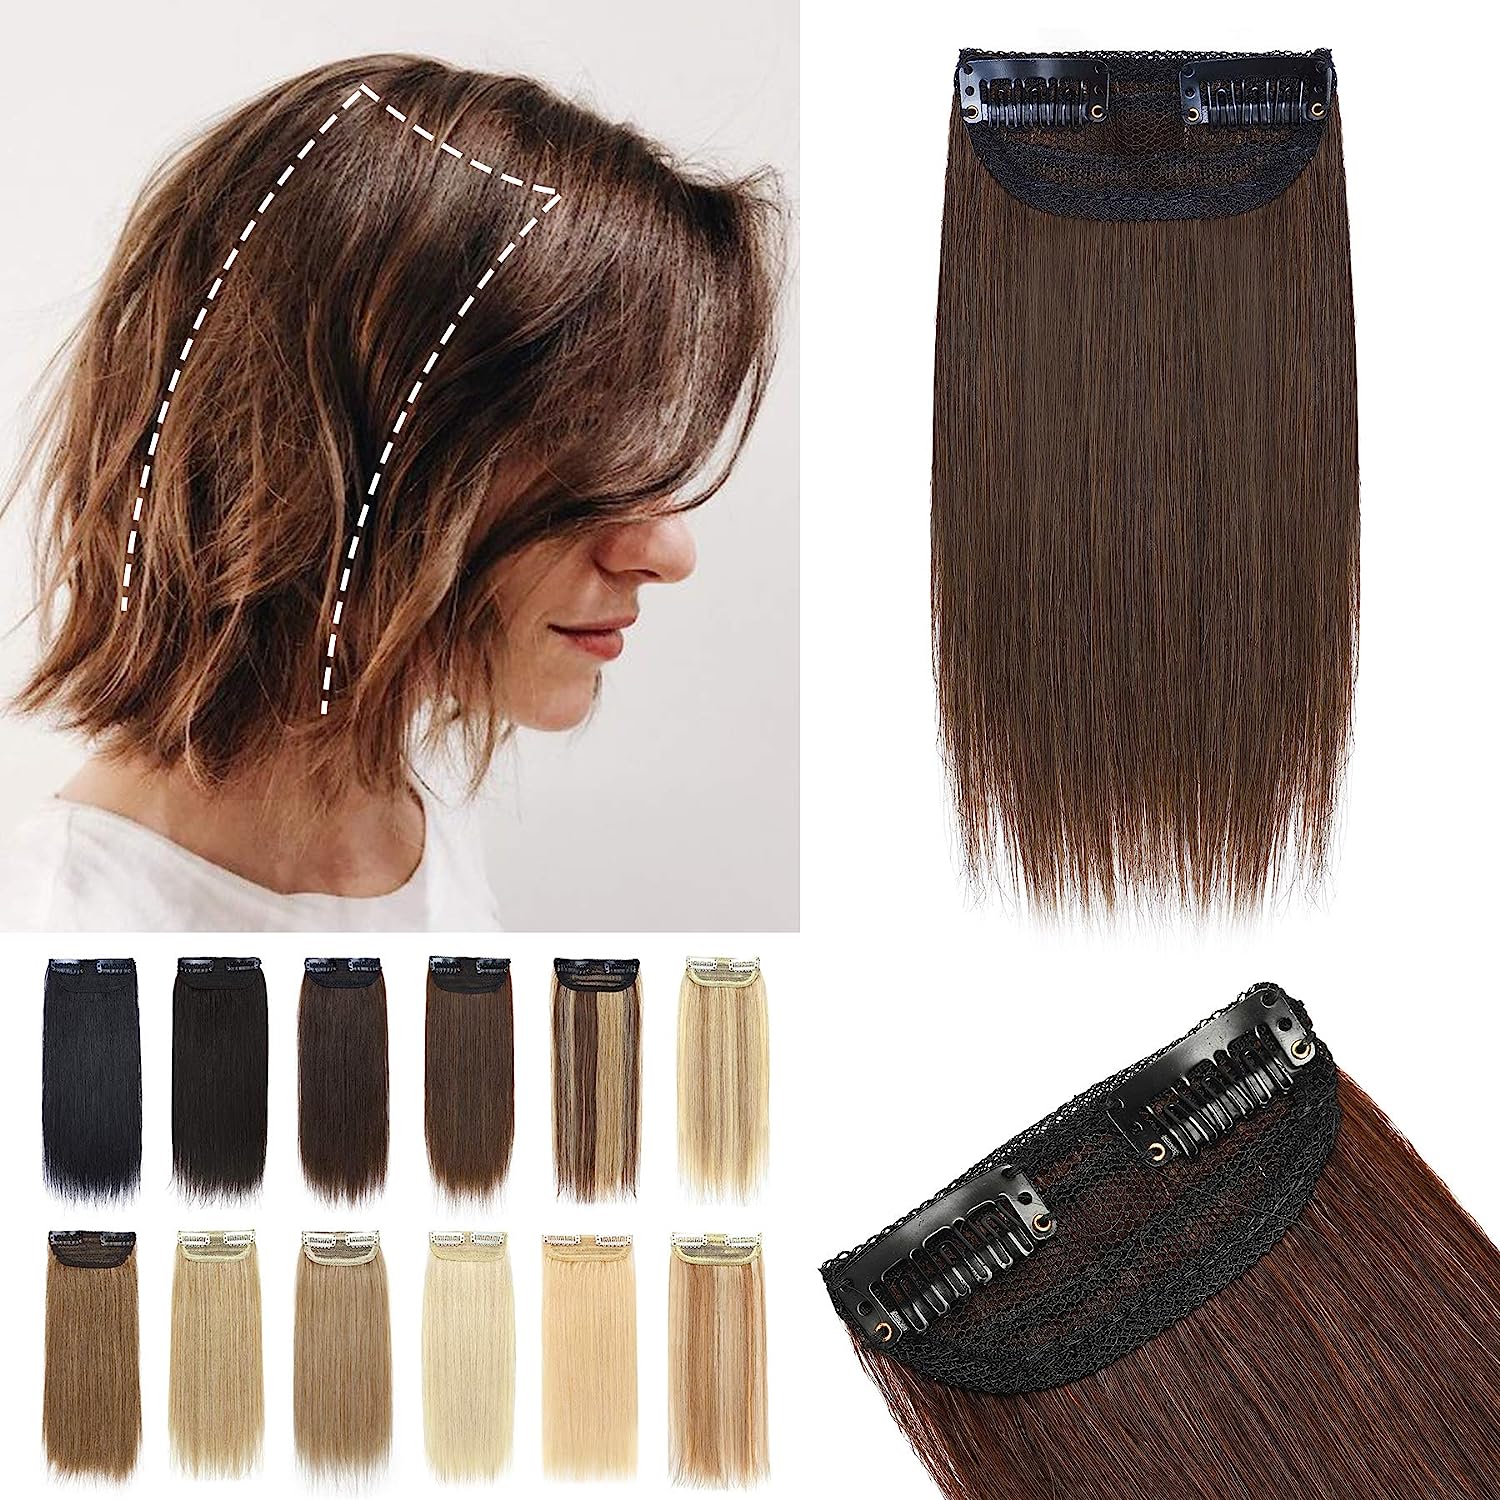 S-noilite Short Hair Extensions Clip in Human Hair [...]